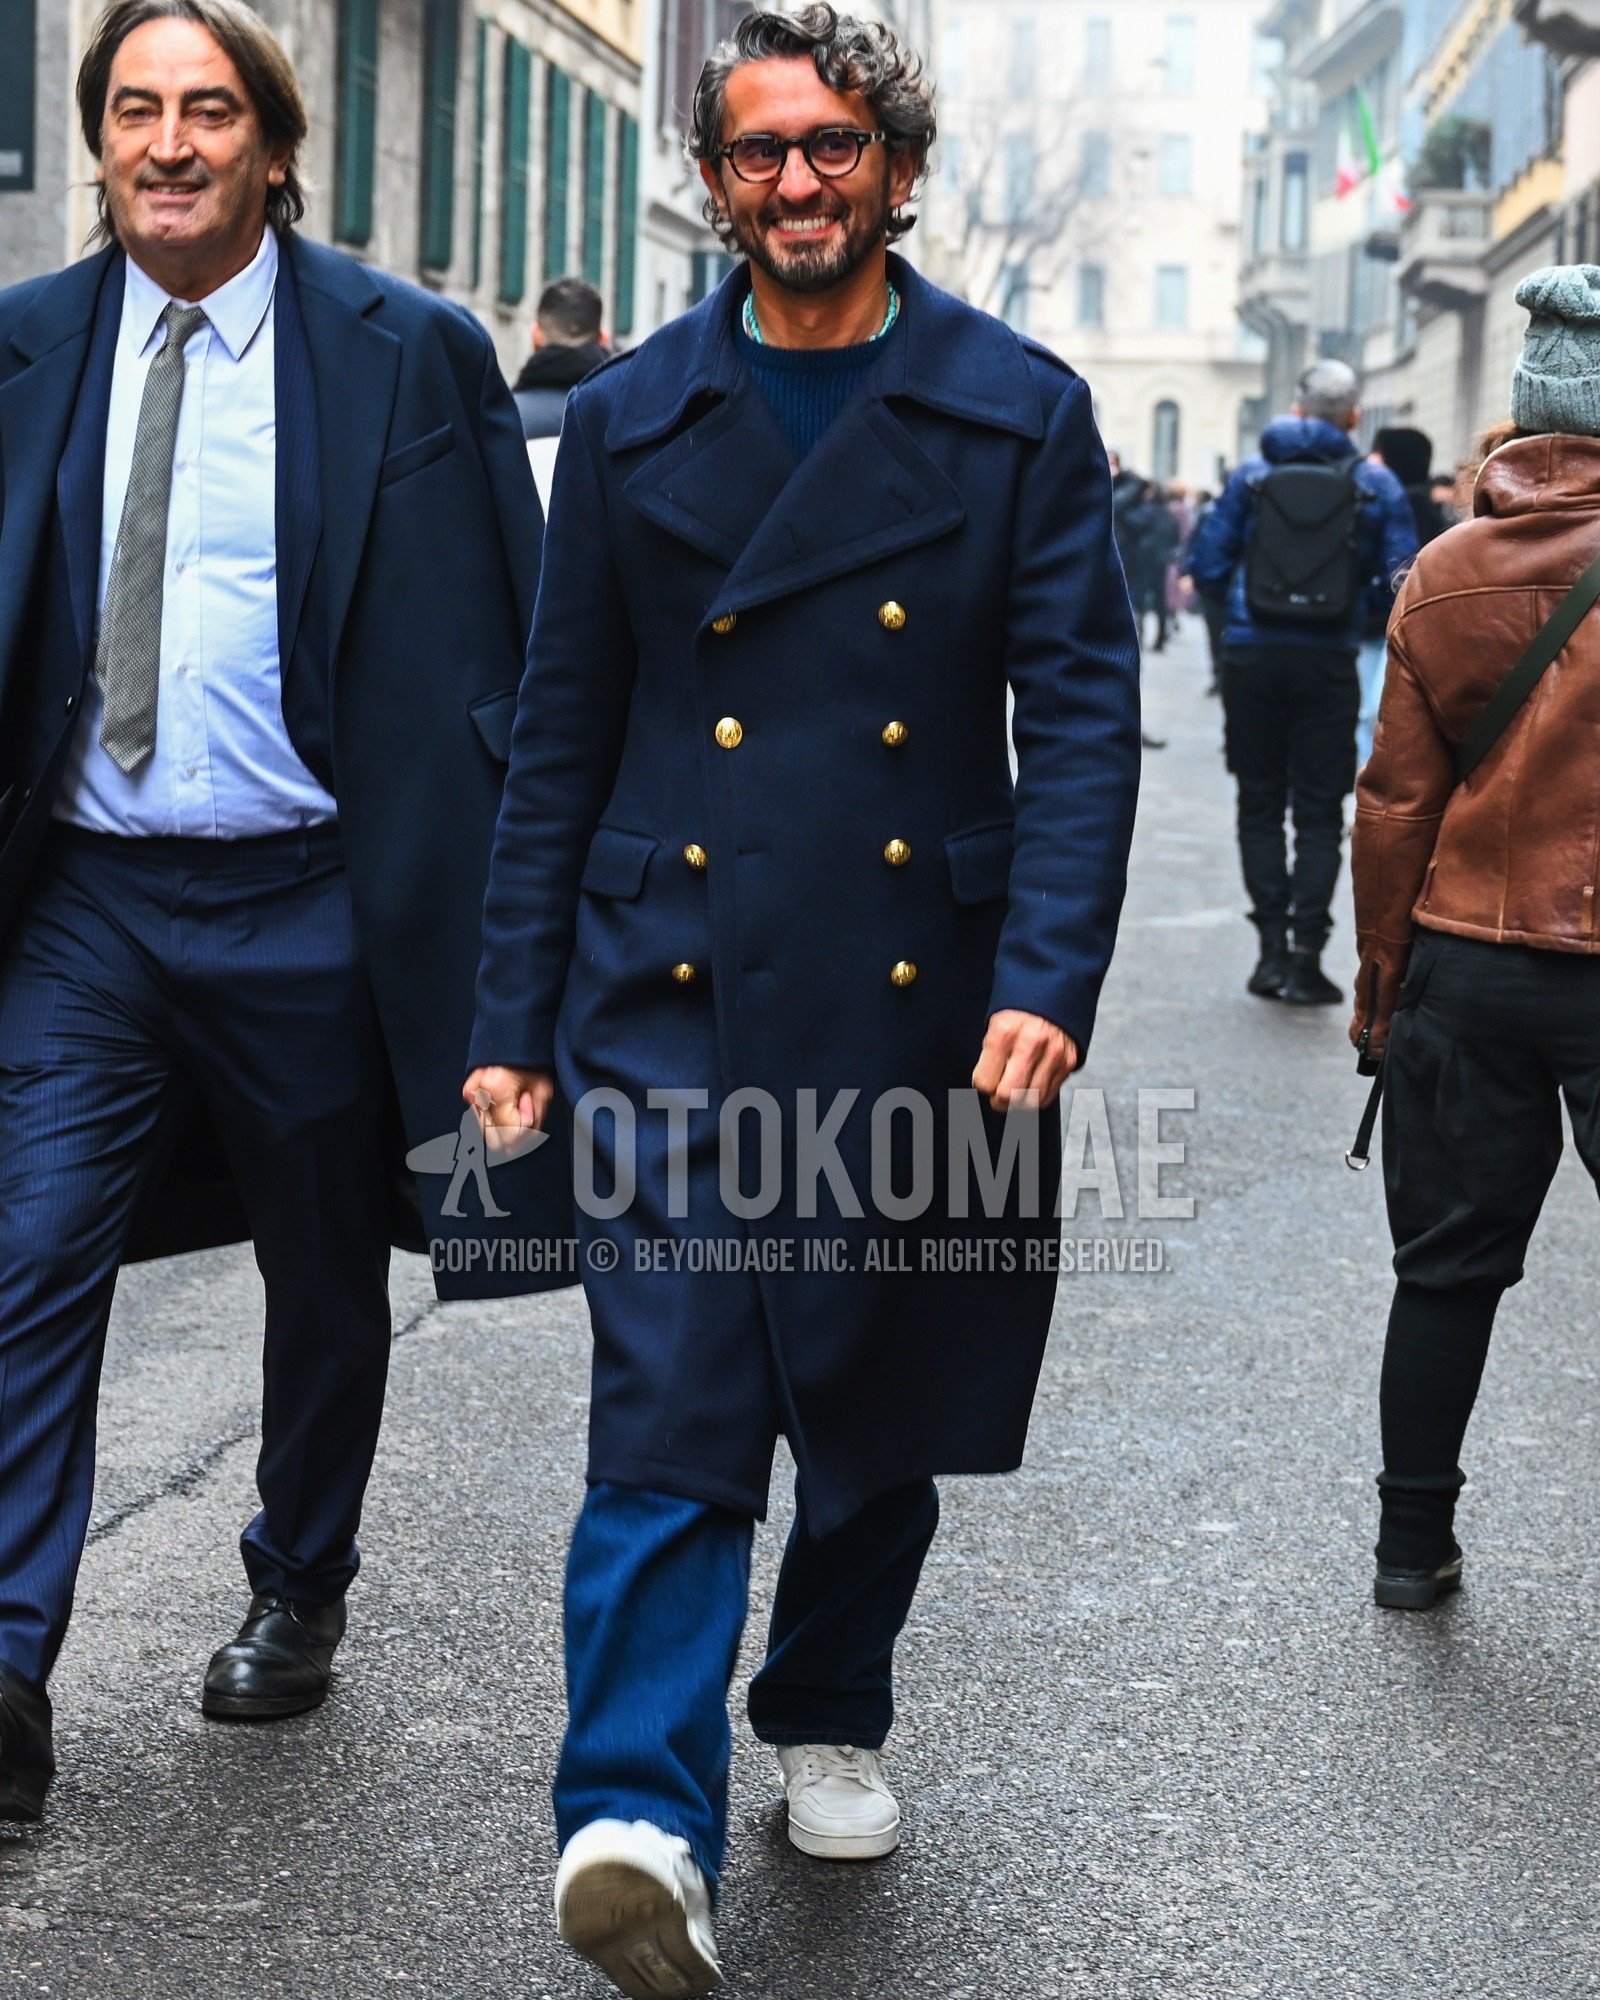 Men's autumn winter outfit with brown tortoiseshell glasses, navy plain ulster coat, navy plain sweater, blue plain denim/jeans, white low-cut sneakers.